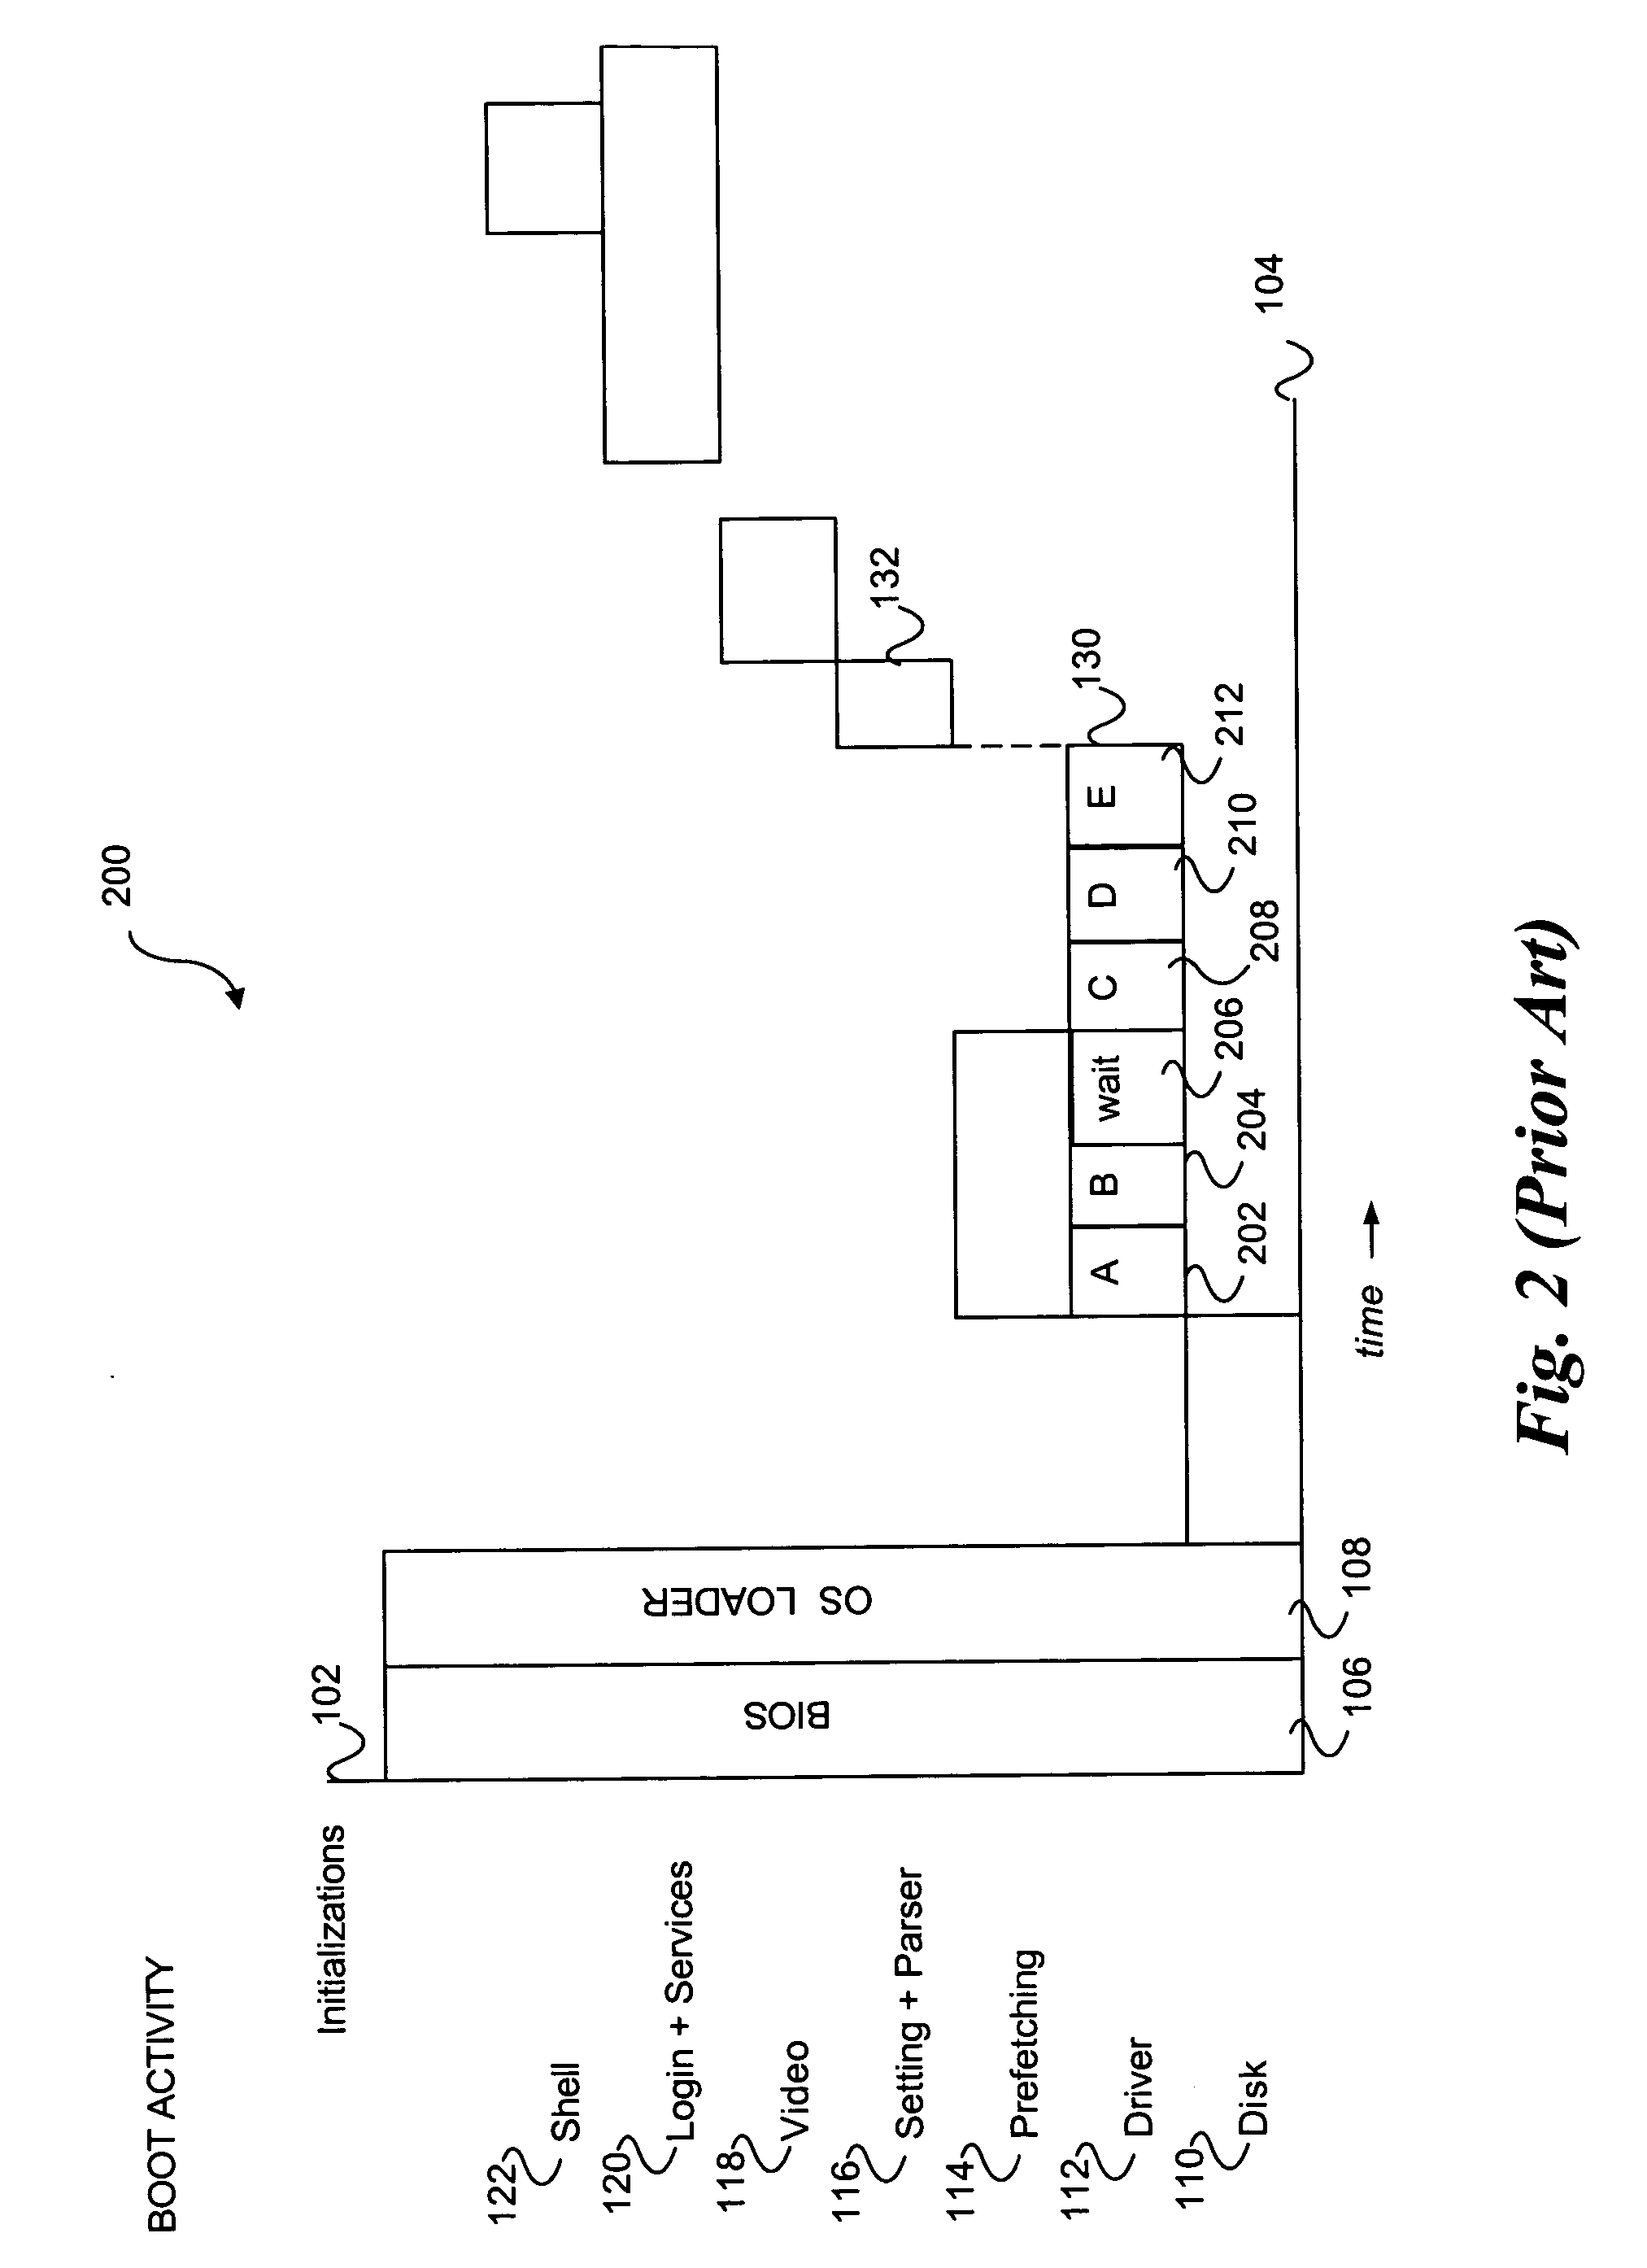 System and method for accelerated device initialization